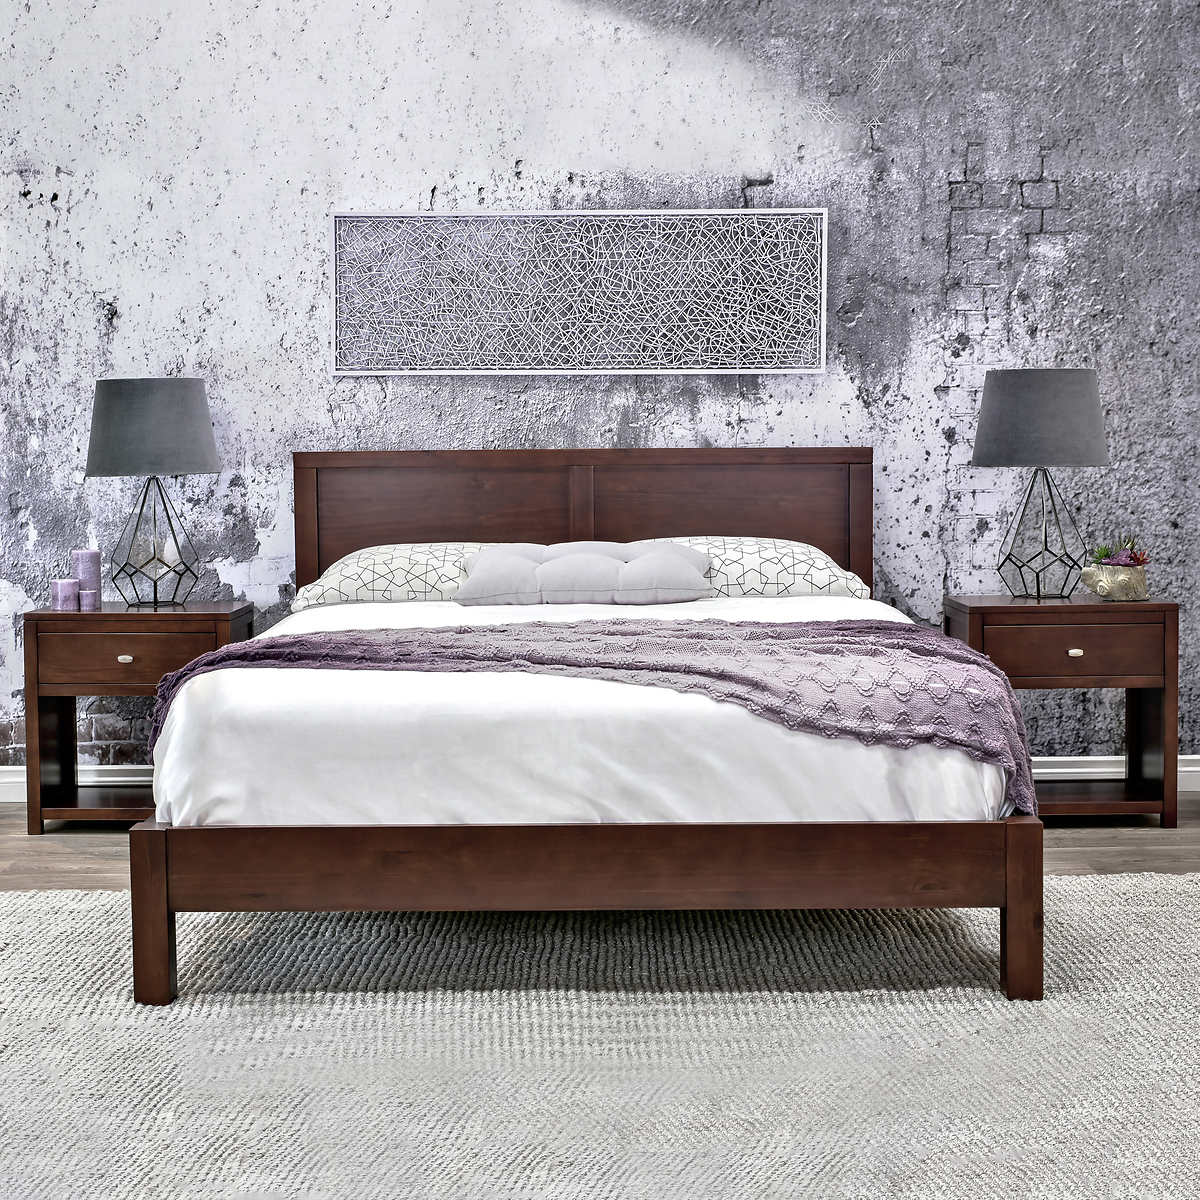 Pacifica King Platform Bed Costco, King Bed Only